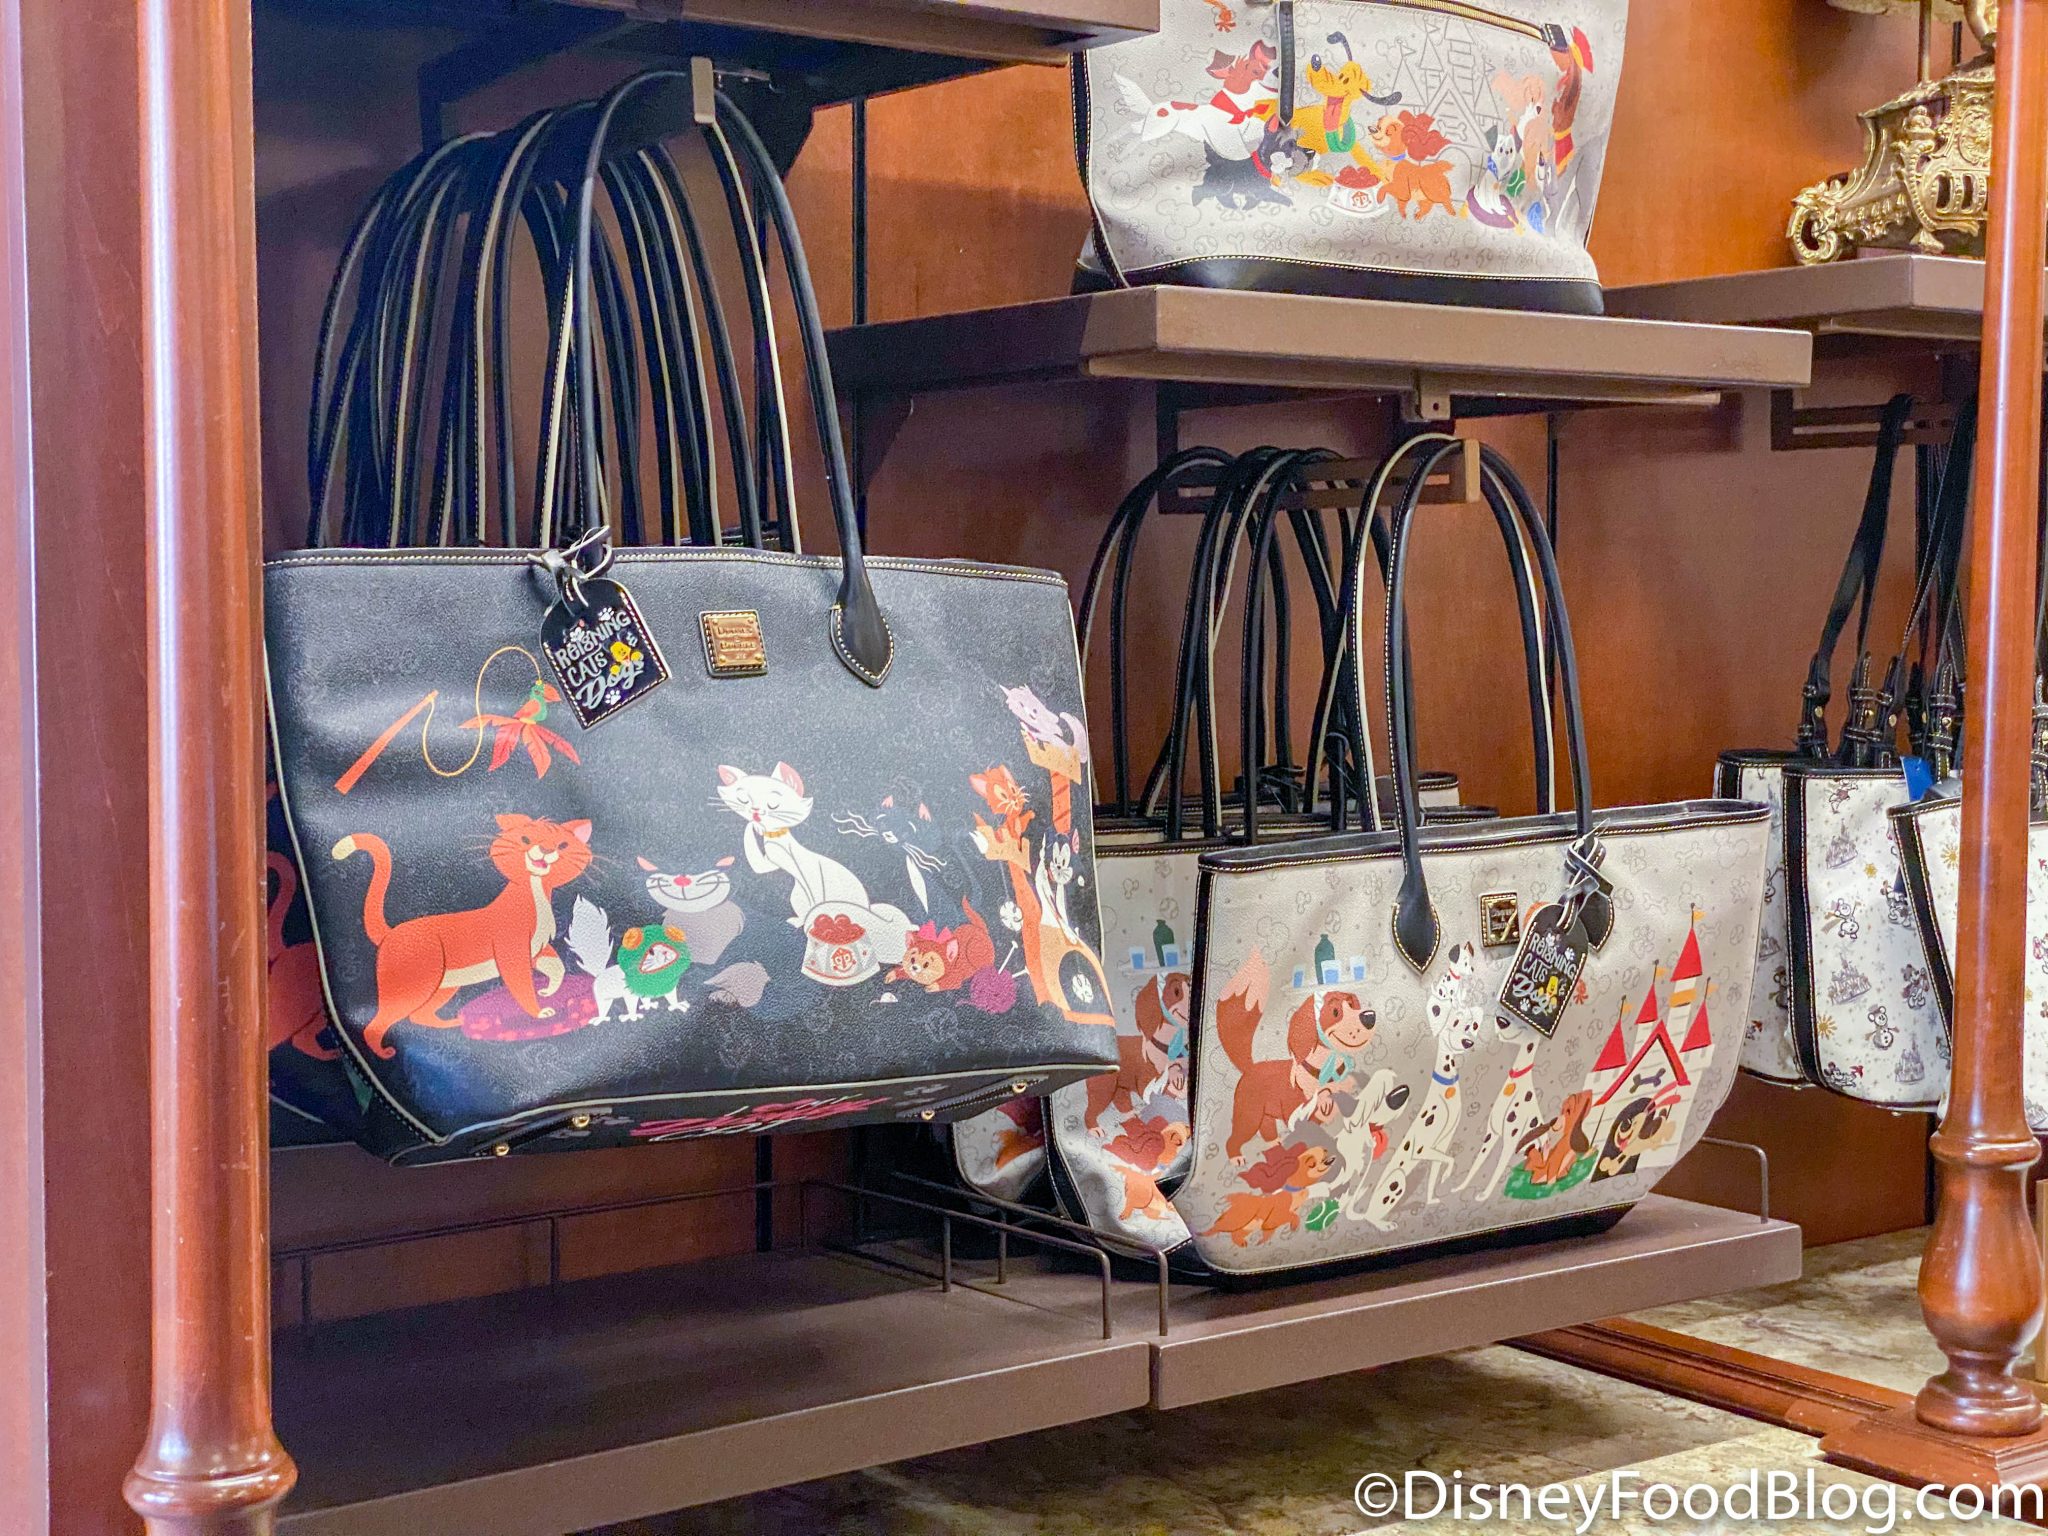 PHOTOS The NEW Dooney & Bourke Dog and Cat Bags Are NOW Available in